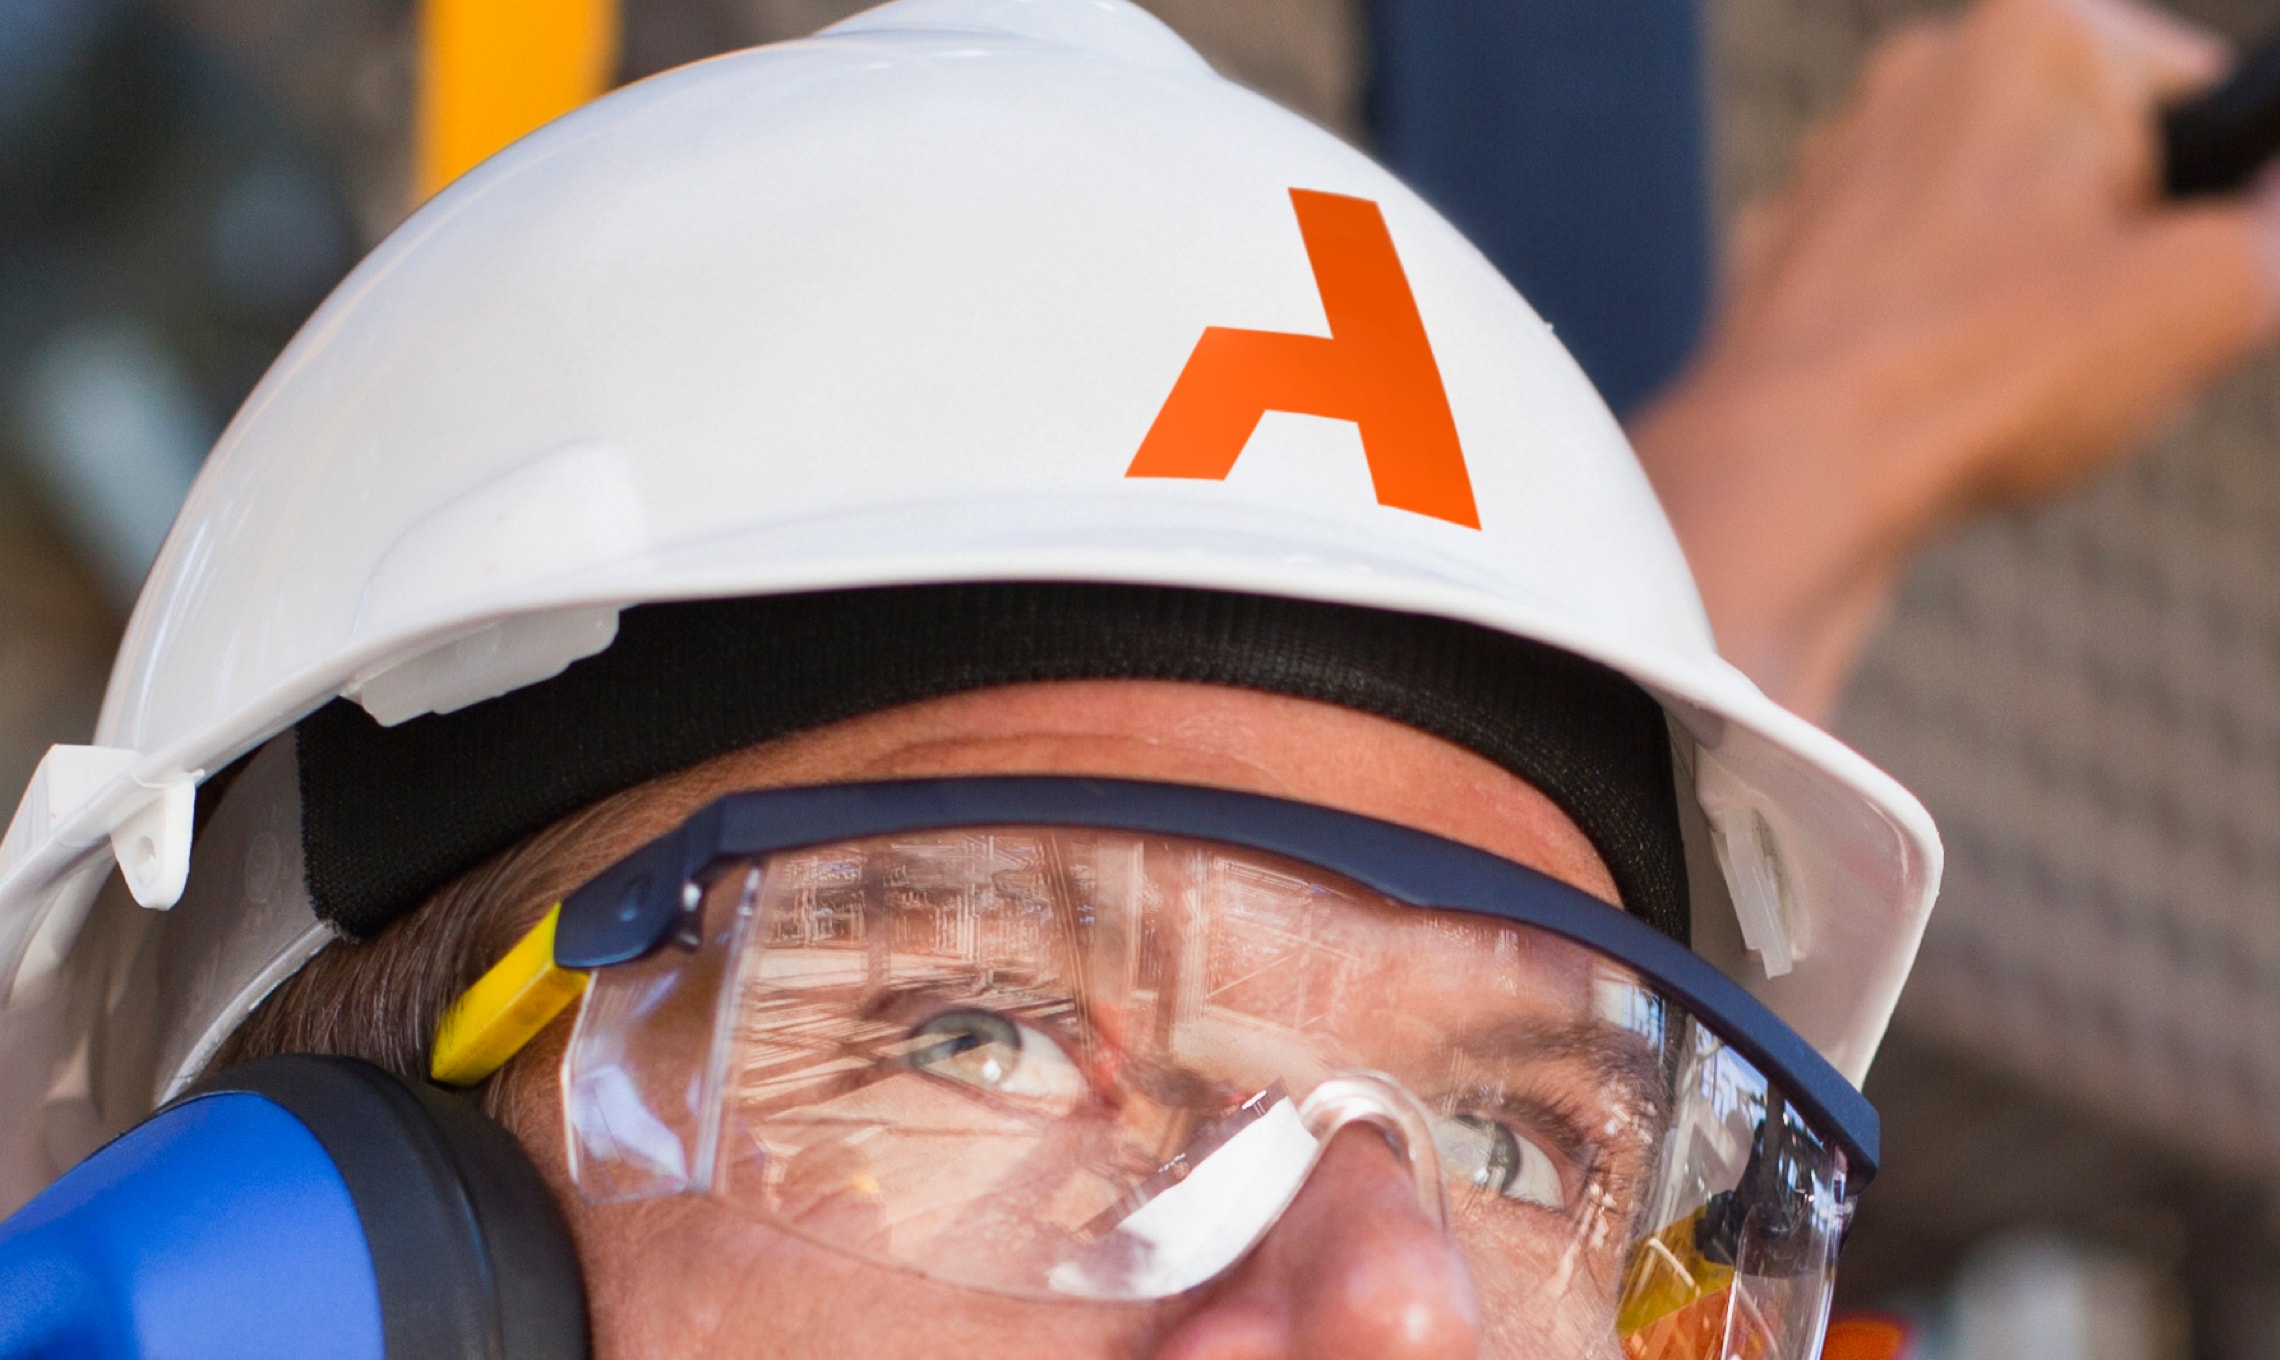 A man representing brand identity, wearing a hard hat and safety goggles.